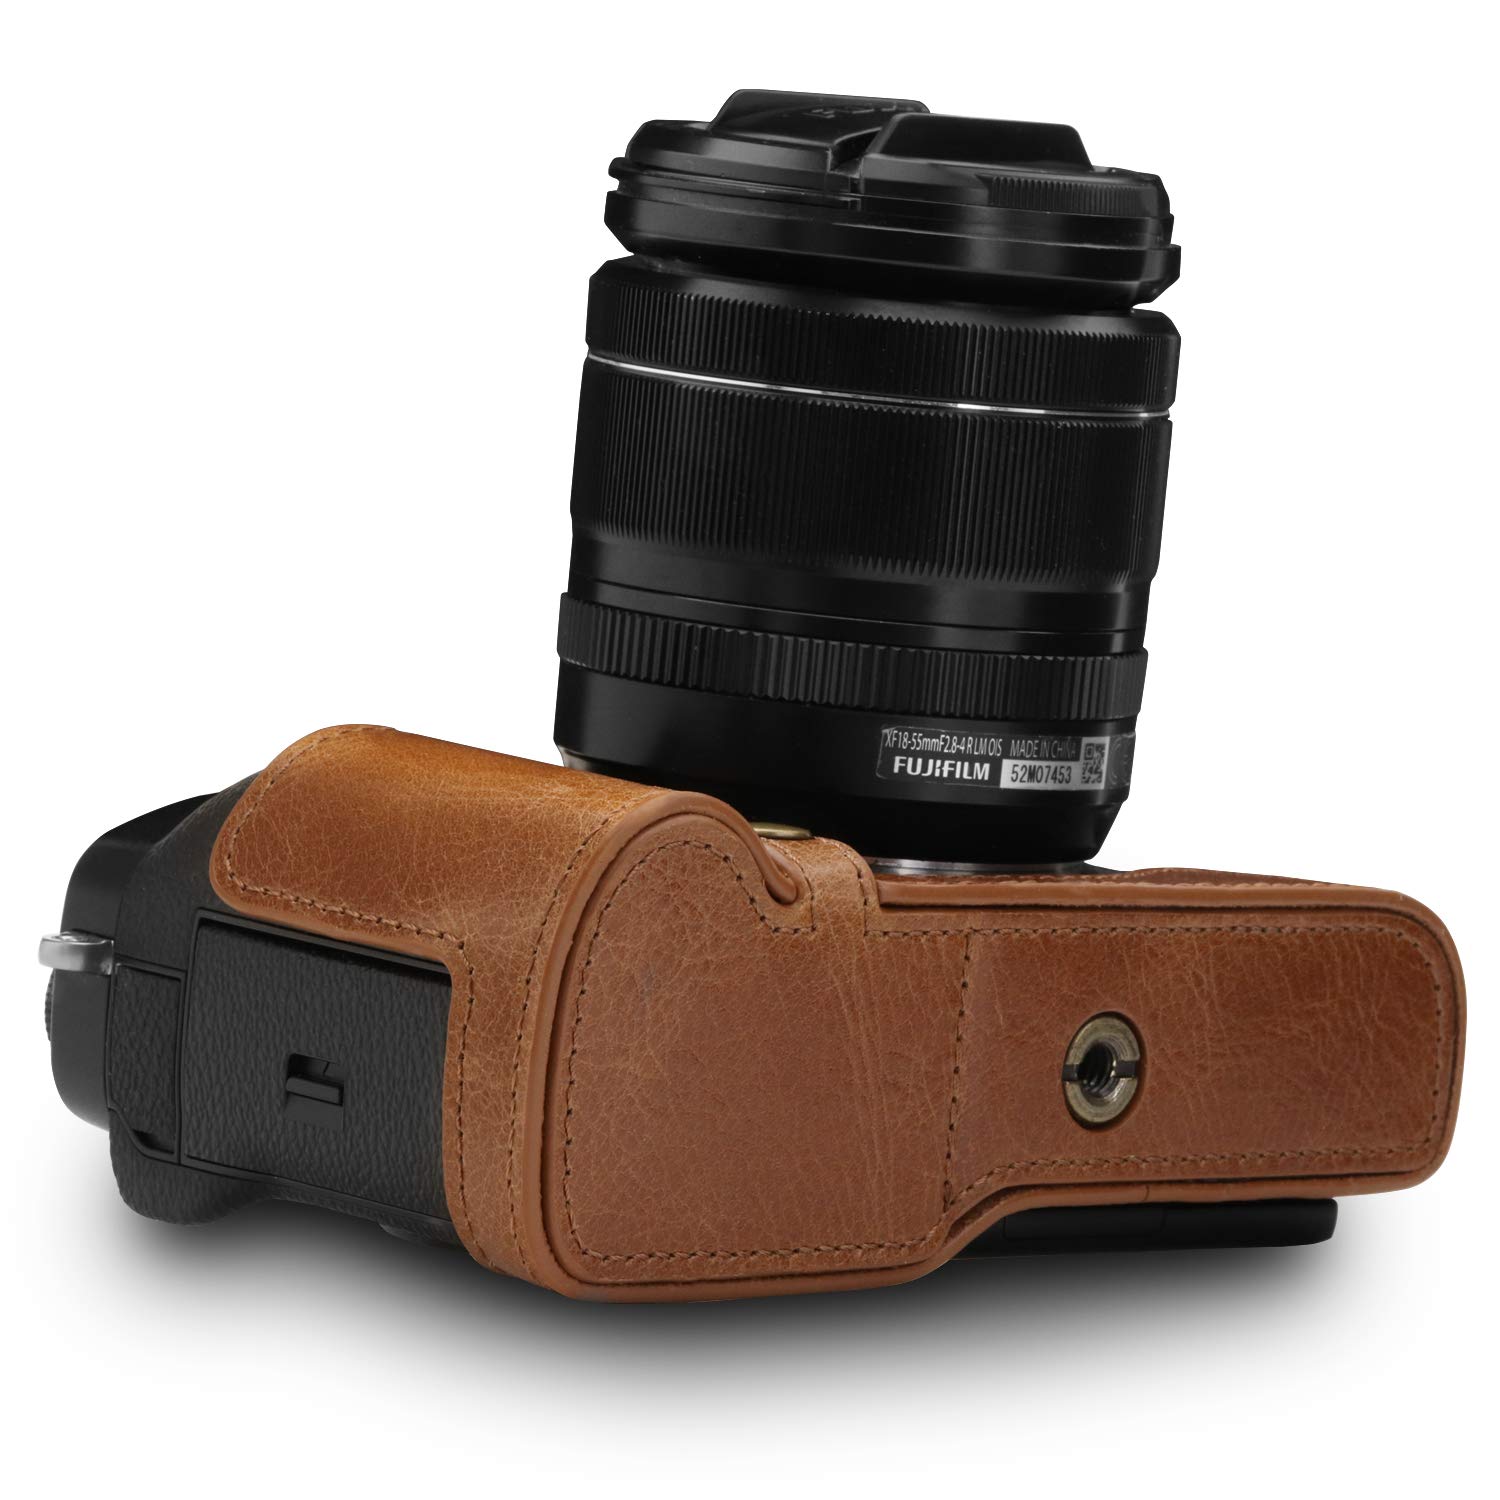 Mega Gear MG1553 X-T3 Ever Ready Genuine Leather Camera Half Case and Strap - Brown, Compact